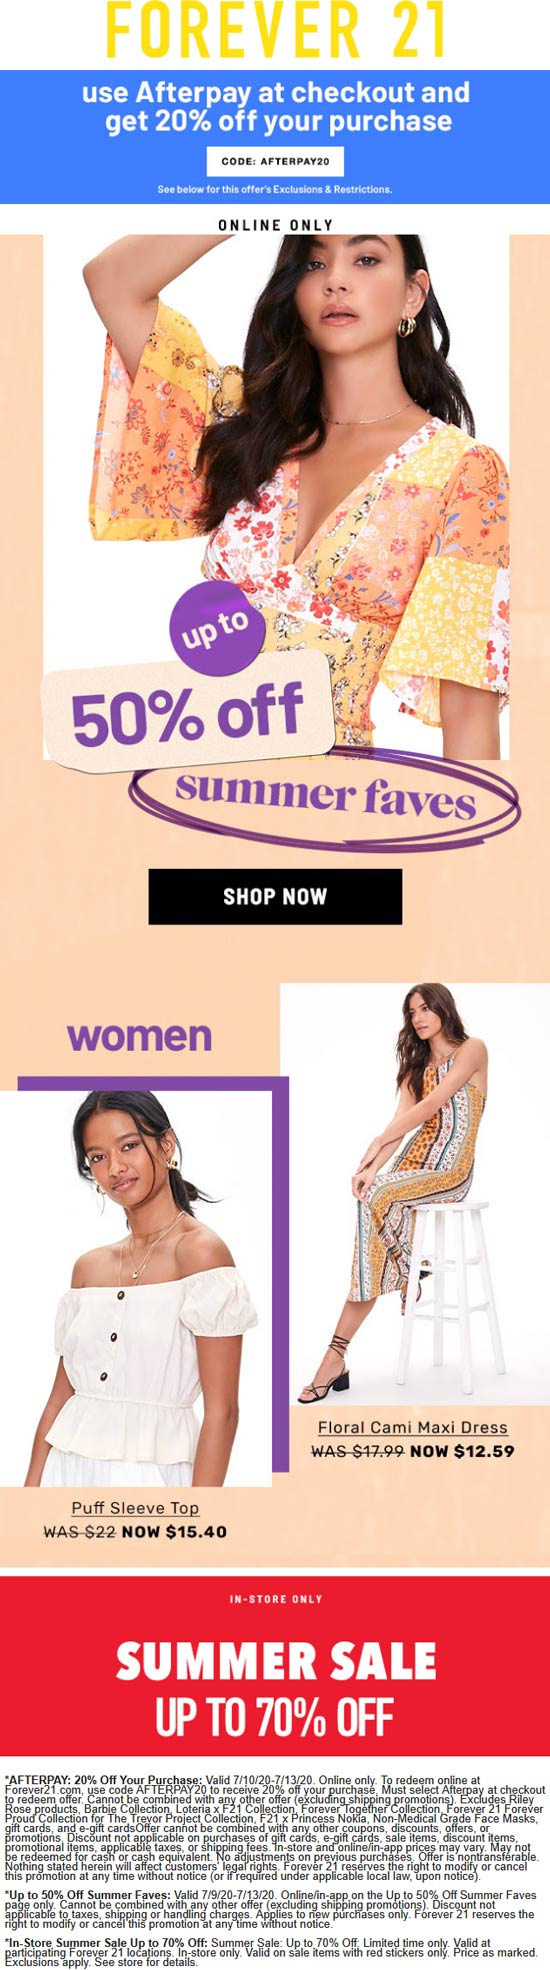 Forever 21 stores Coupon  20% off & more at Forever 21 using promo code AFTERPAY20 #forever21 forever21 f21xme f21 hm hnm pullnbear bershka forever21ph zara chokermurah cottonon 